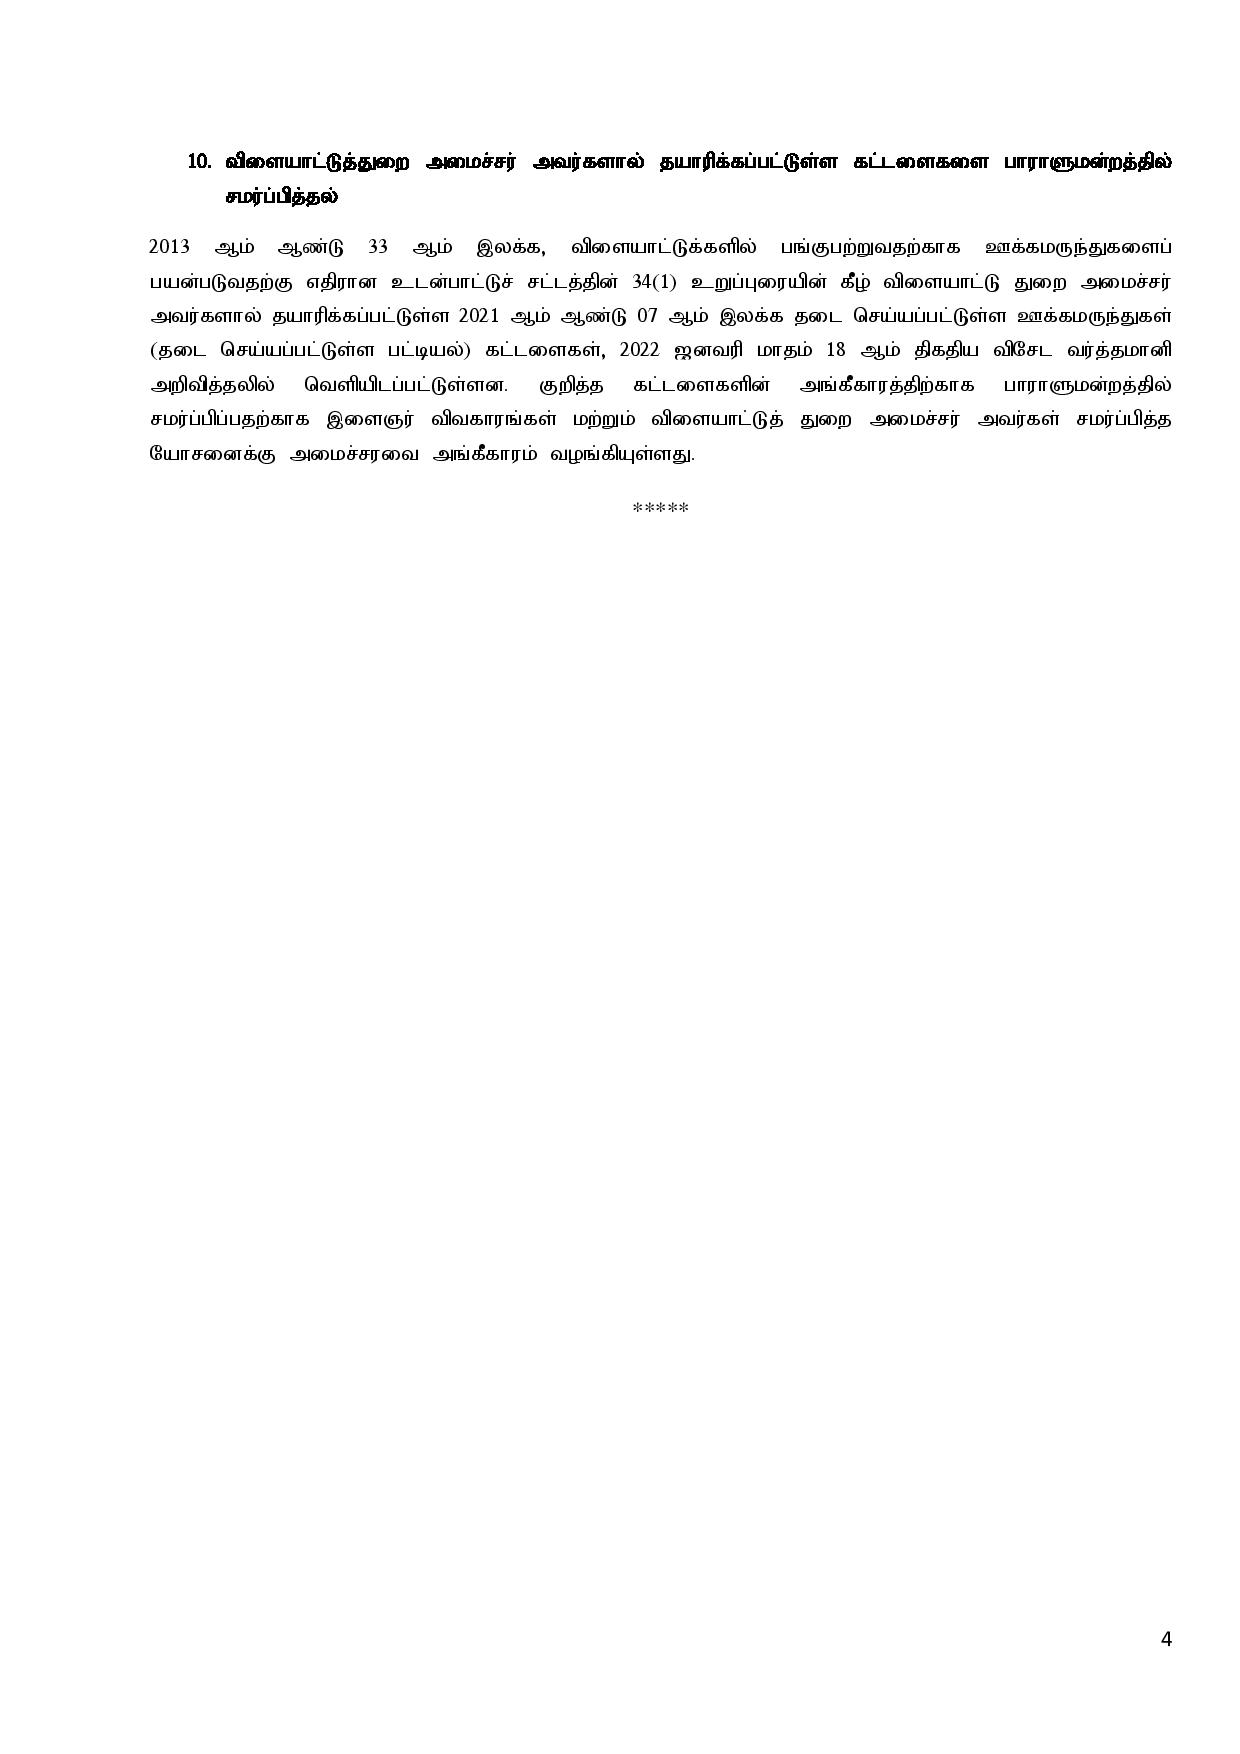 Cabinet Decisions on 21.02.2022 Tamil page 004